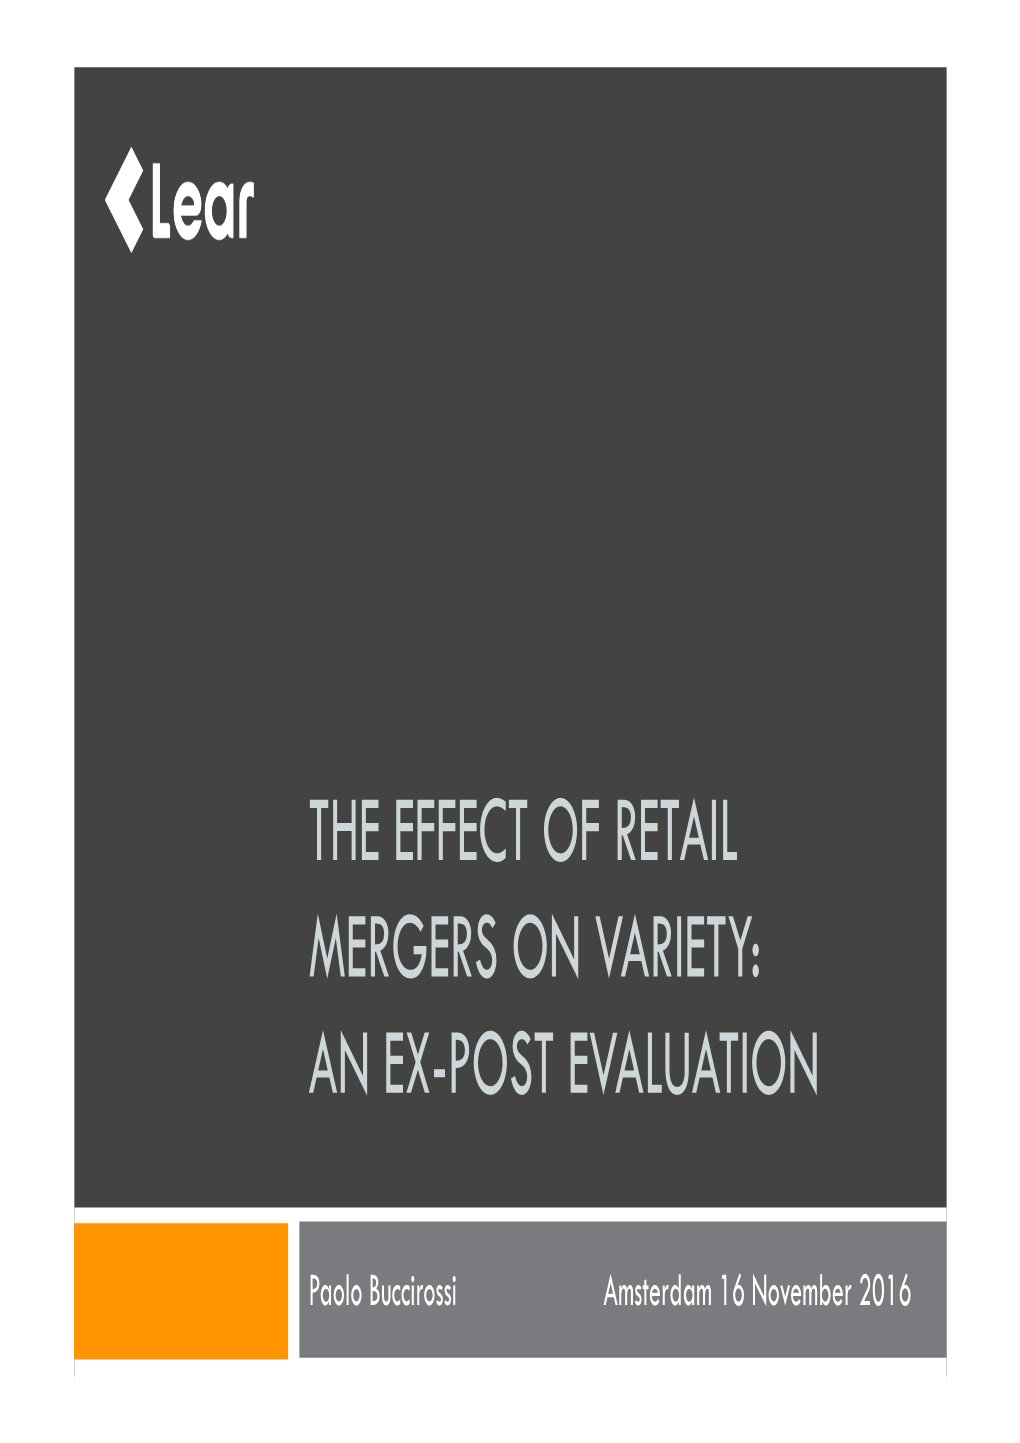 The Effect of Retail Mergers on Variety: an Ex-Post Evaluation